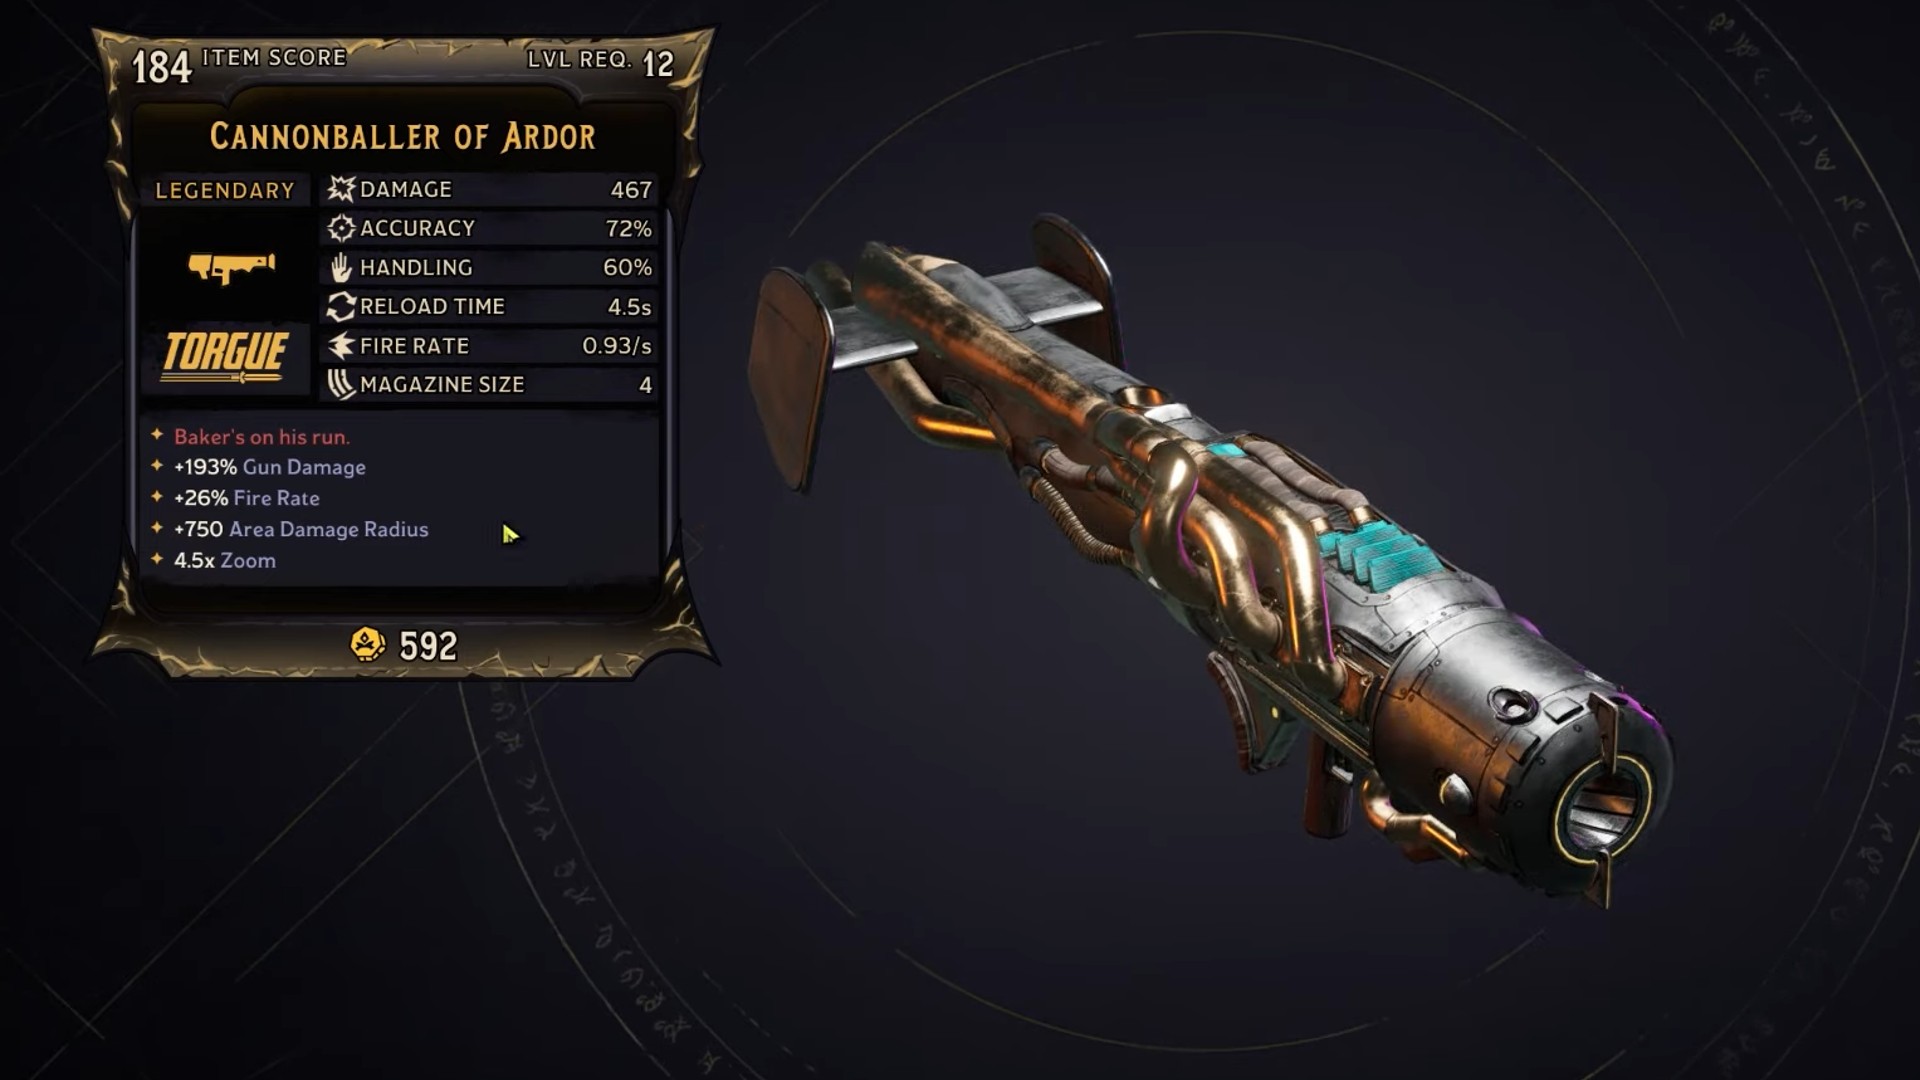 Tiny Tina's Wonderlands legendary weapons: the stats and model of the Cannonballer of Ardor rocket launcher.